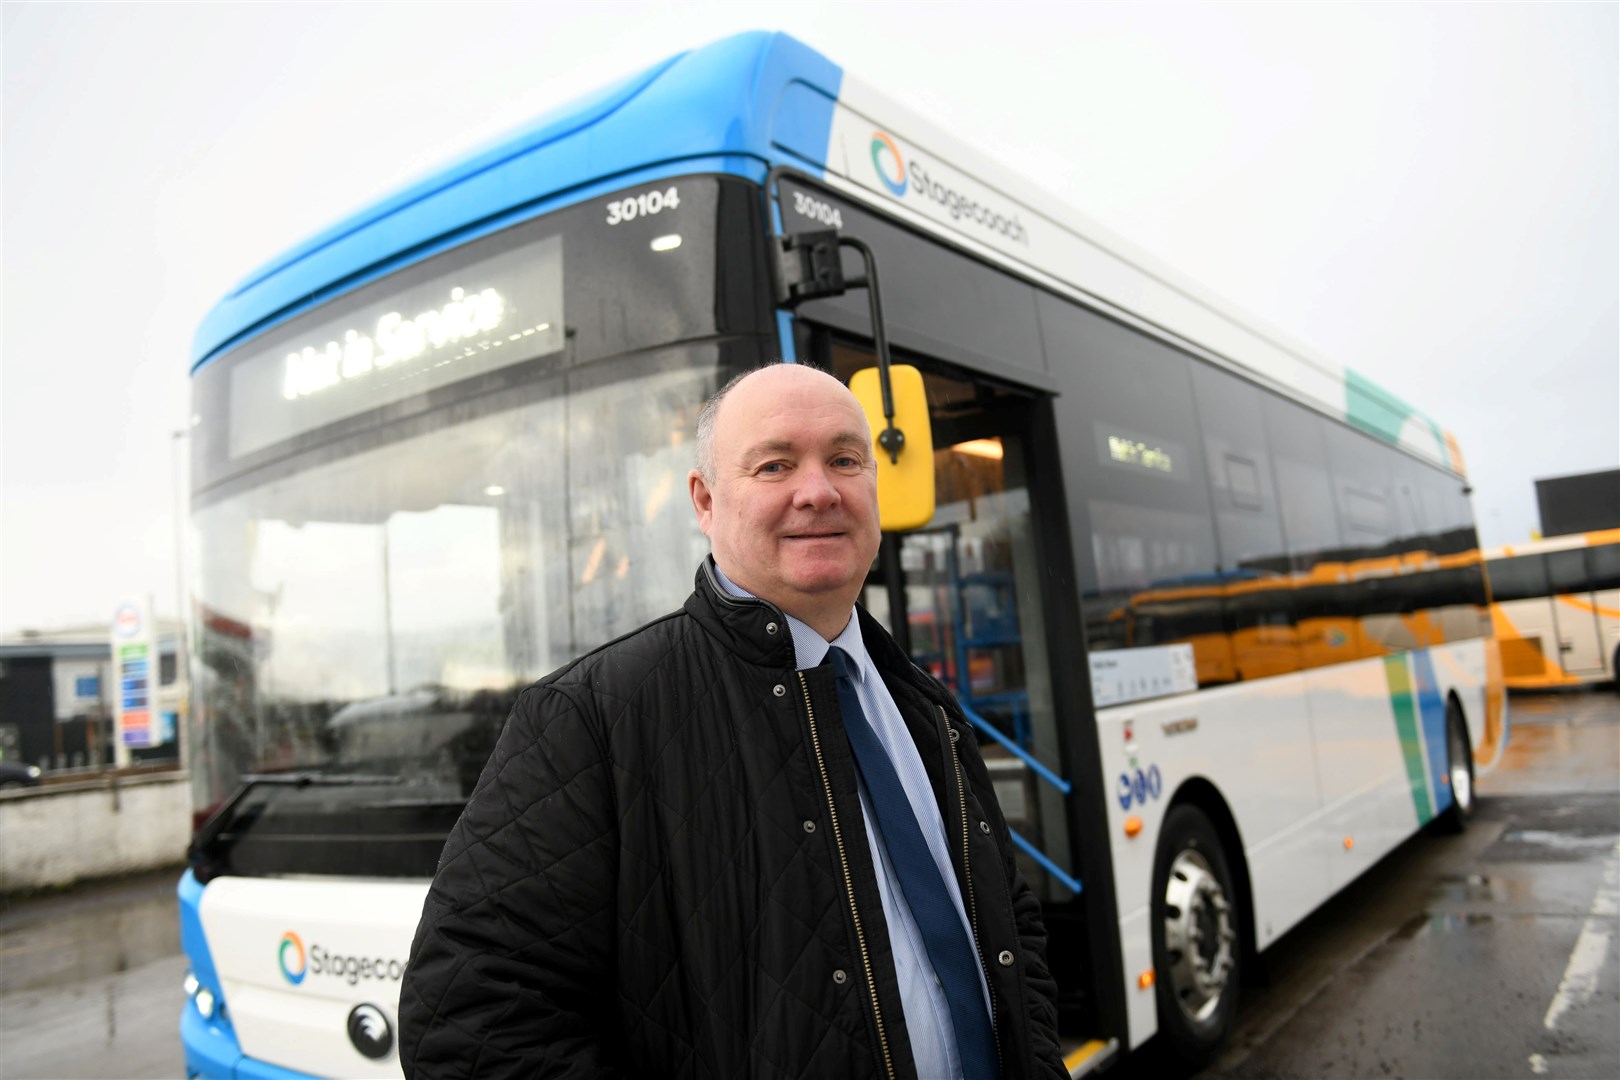 David Beaton has said there will be better connectivity in the strath with the launch of the two new services. Picture: Callum Mackay.